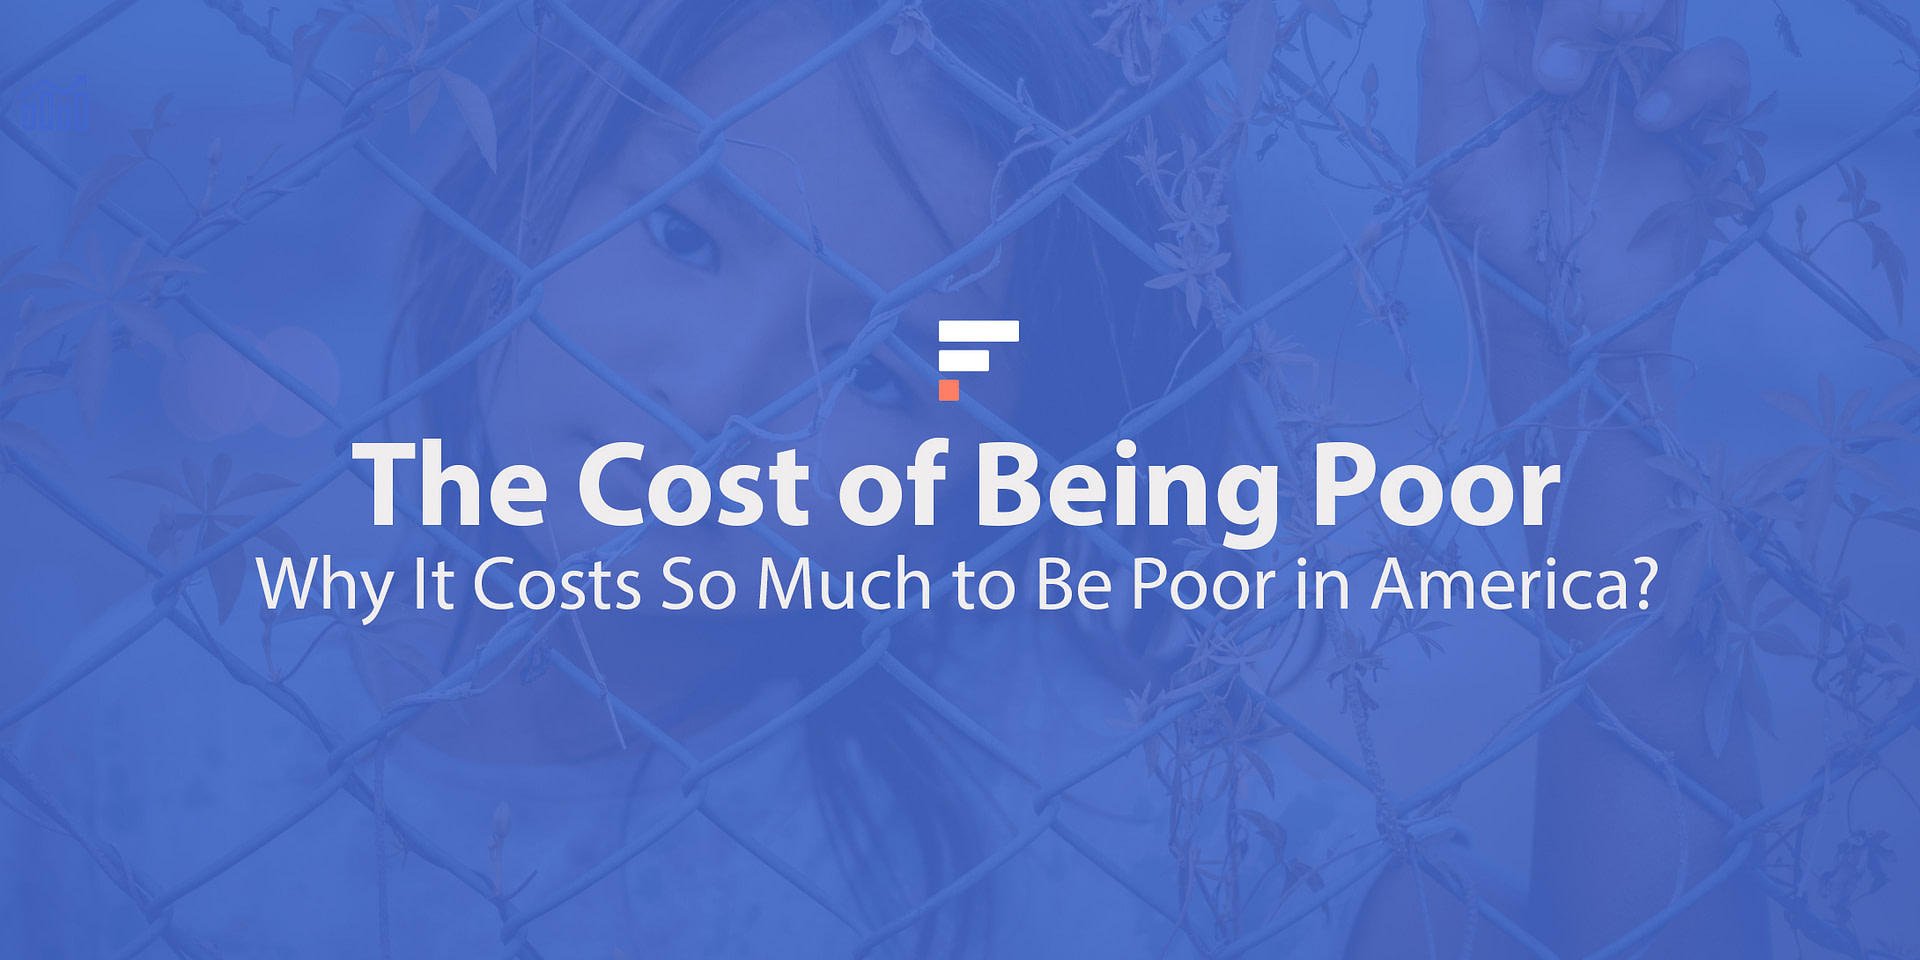 The Cost of Being Poor: Why It Costs So Much to Be Poor in America